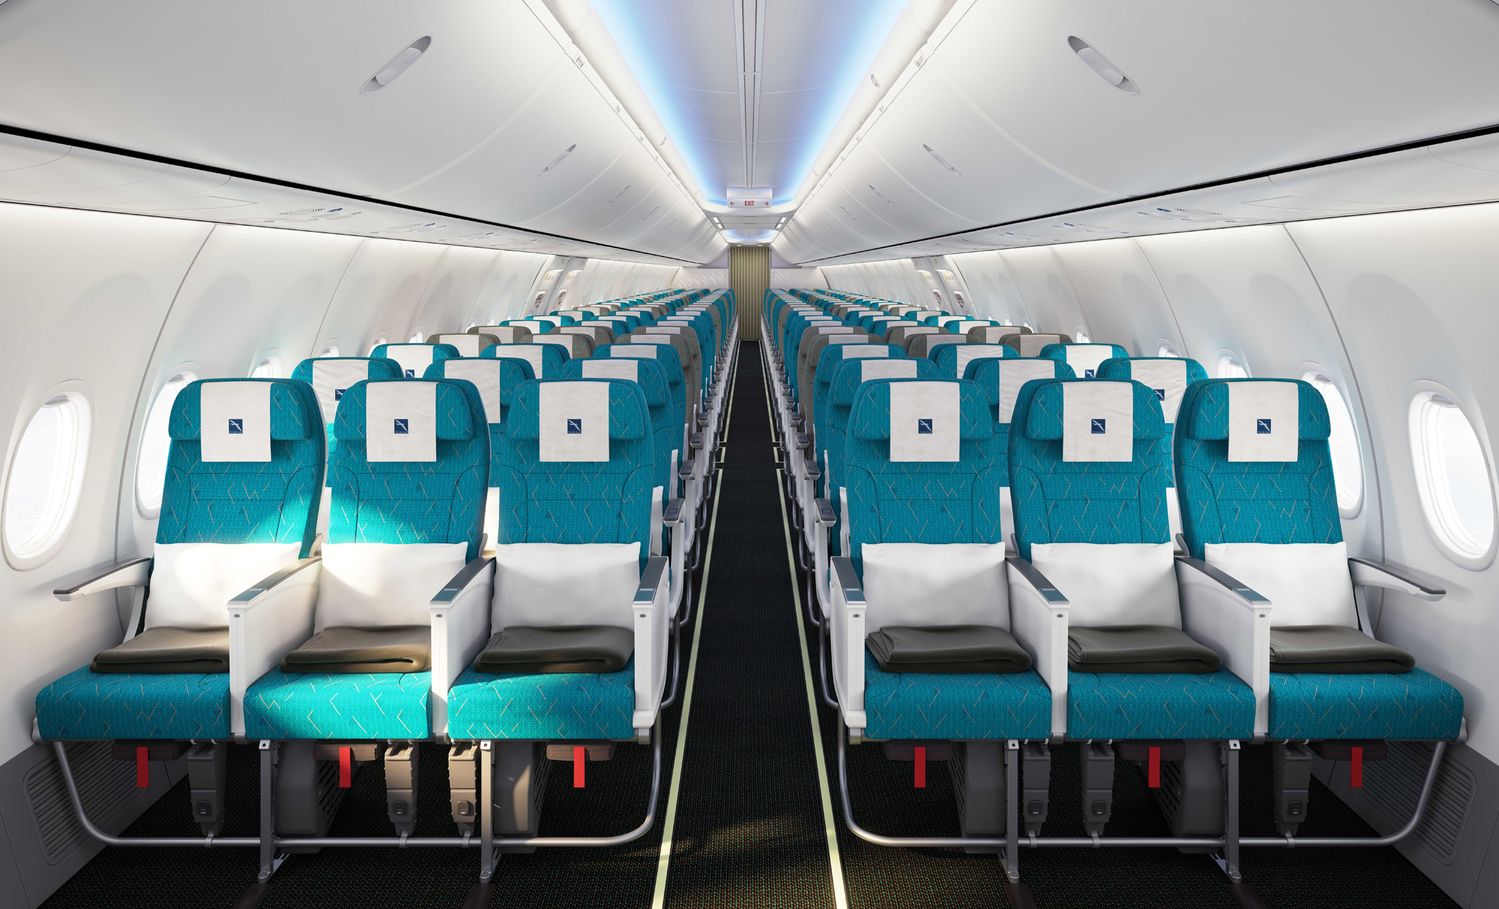 The 144 slimline economy class seats in the Boeing 737 MAX 8 are ranked in a familiar 3-3 layout...